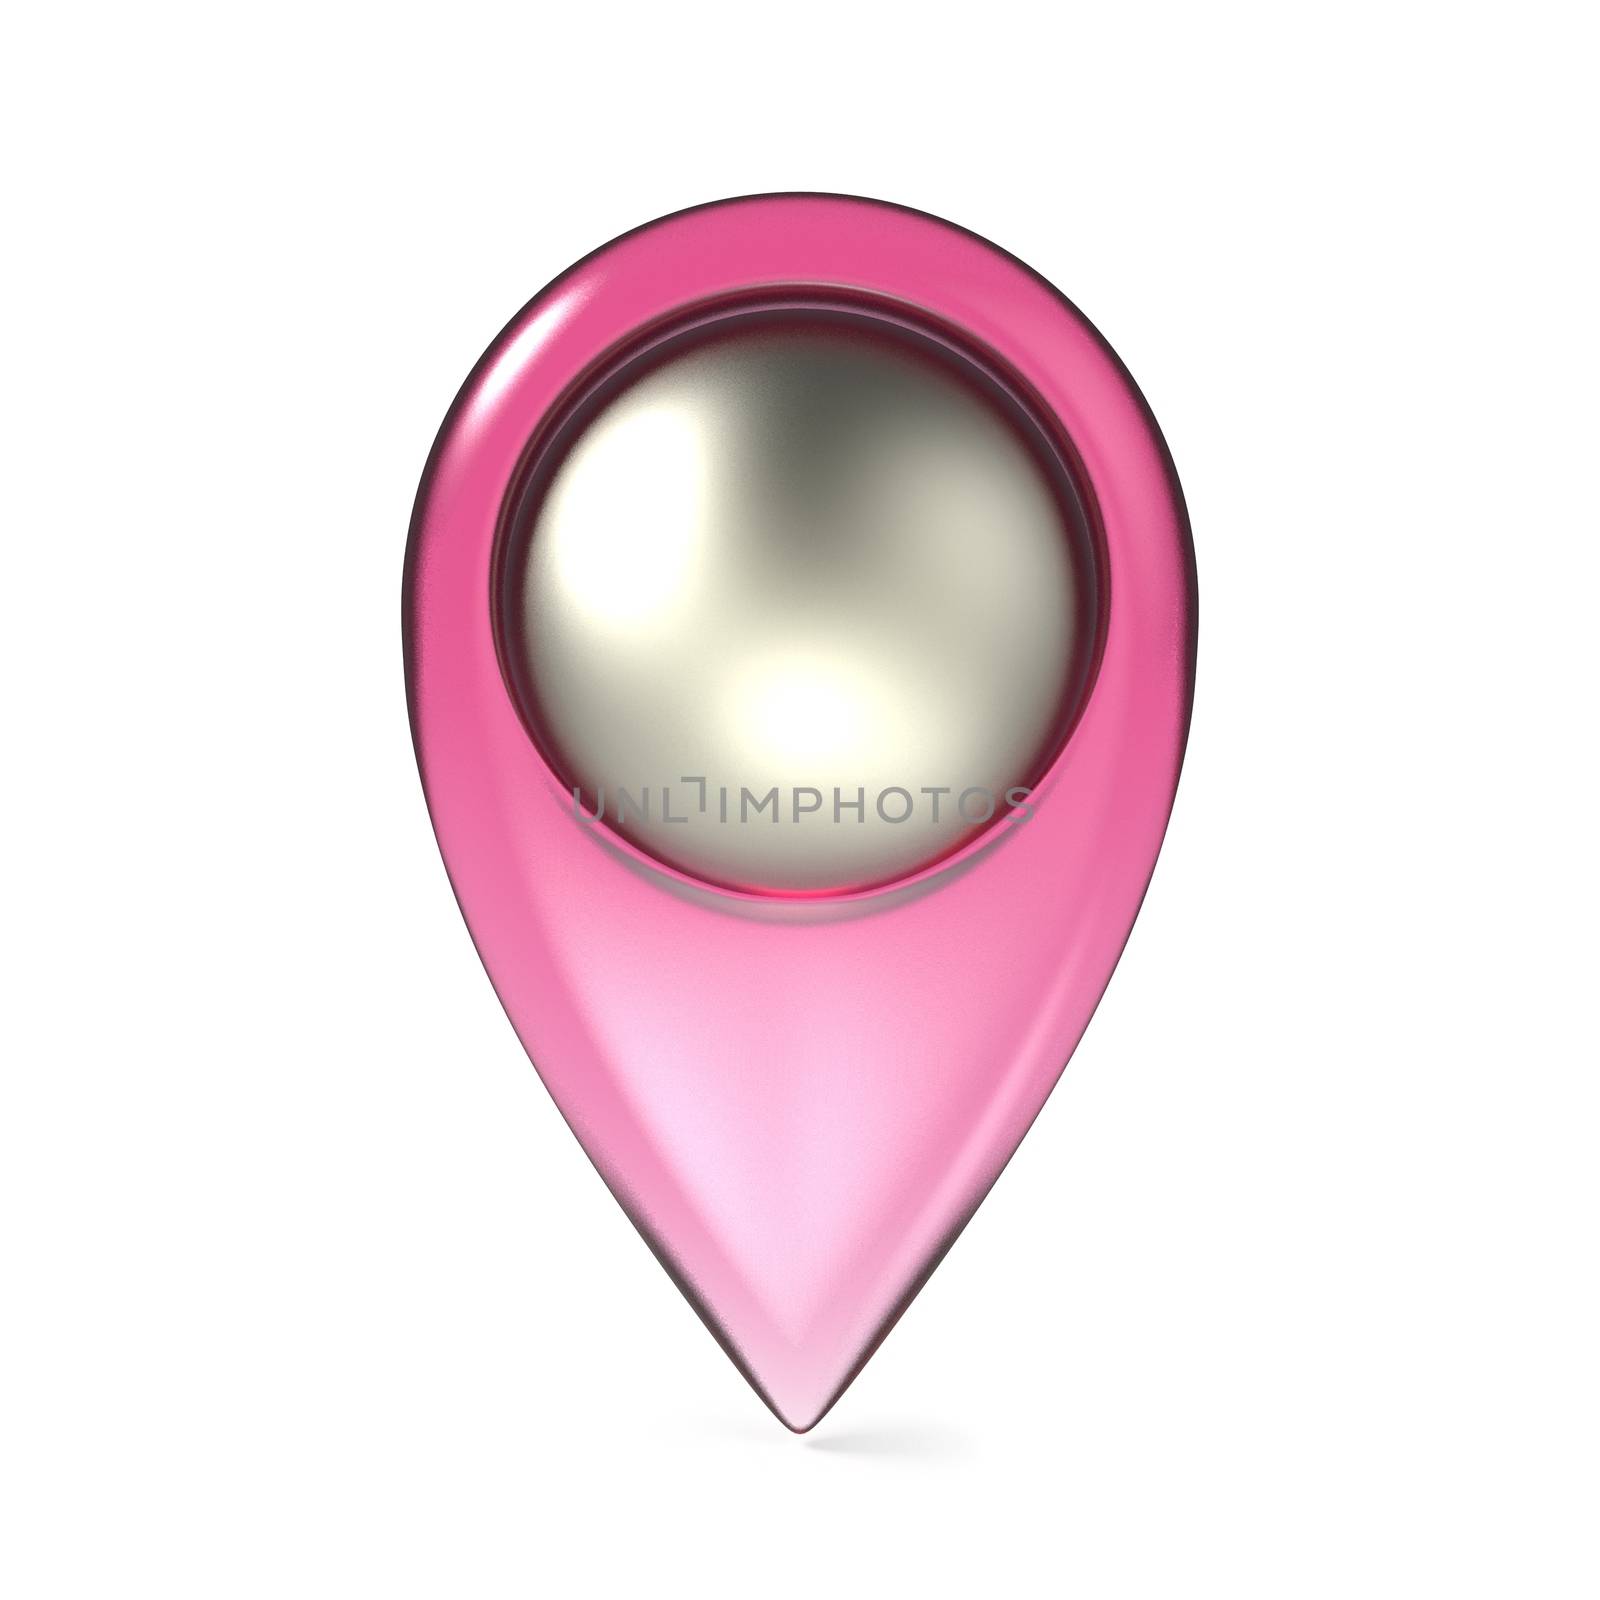 Pink map pointer 3D render illustration isolated on white background